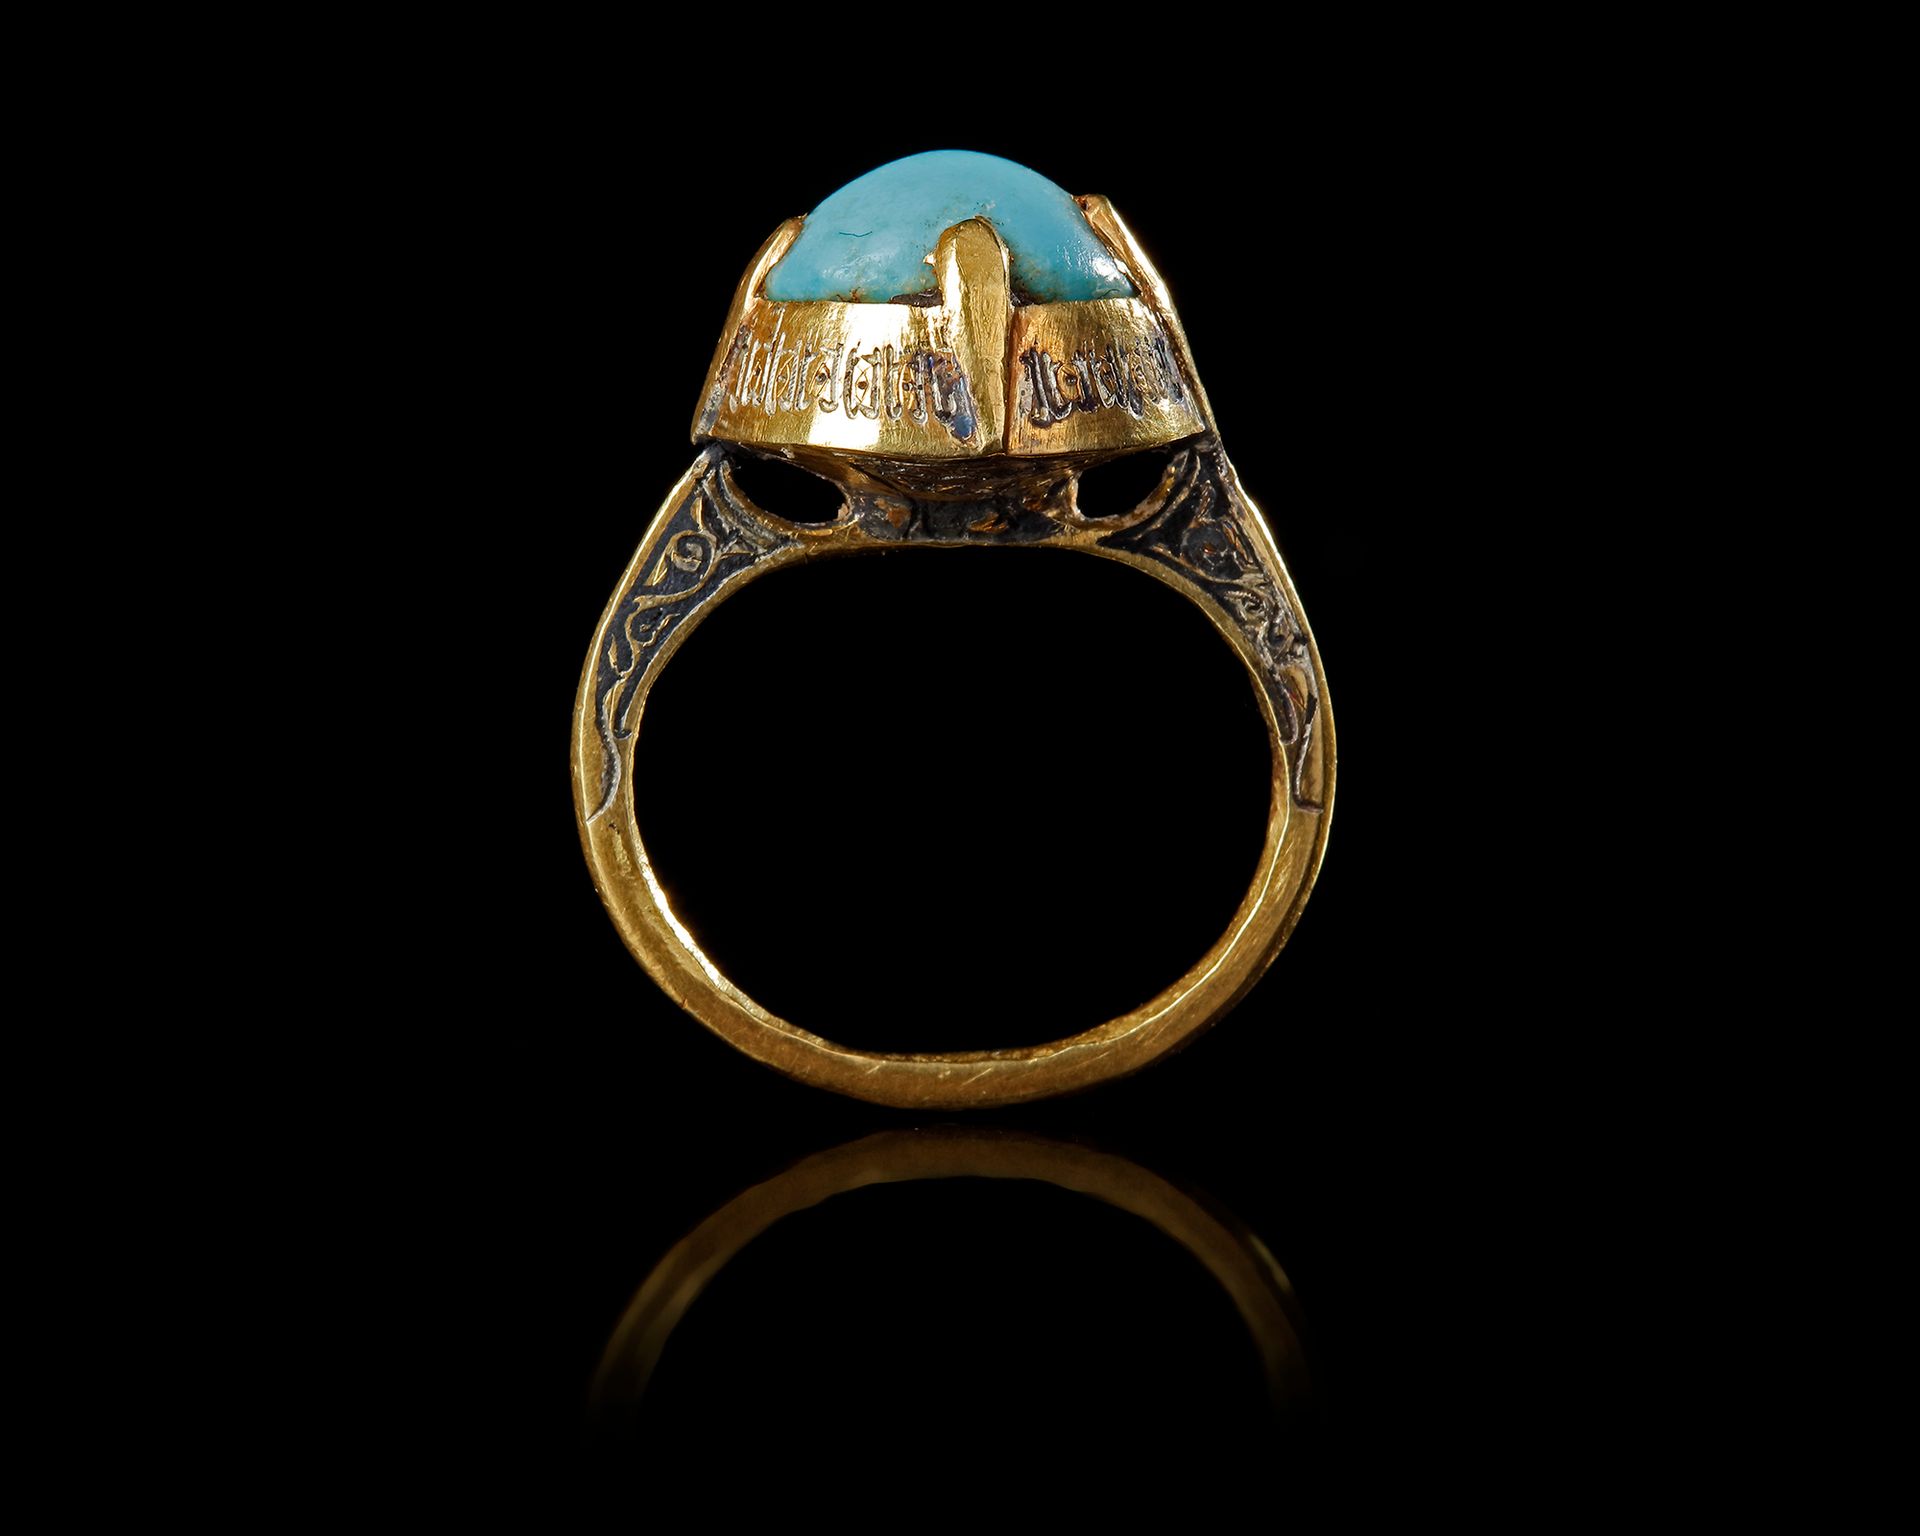 A SELJUK NIELLOED GOLD RING WITH TURQUOISE, PERSIA, 12TH-13TH CENTURY Fundido en&hellip;